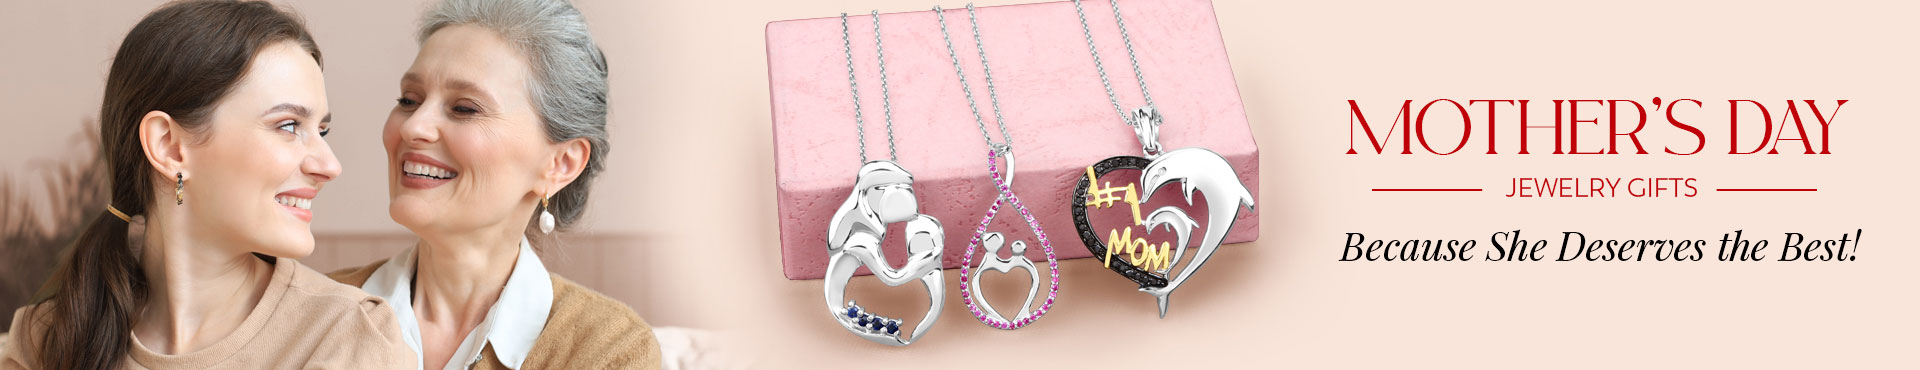 Mother's Days Jewelry Gifts, She's sure to love